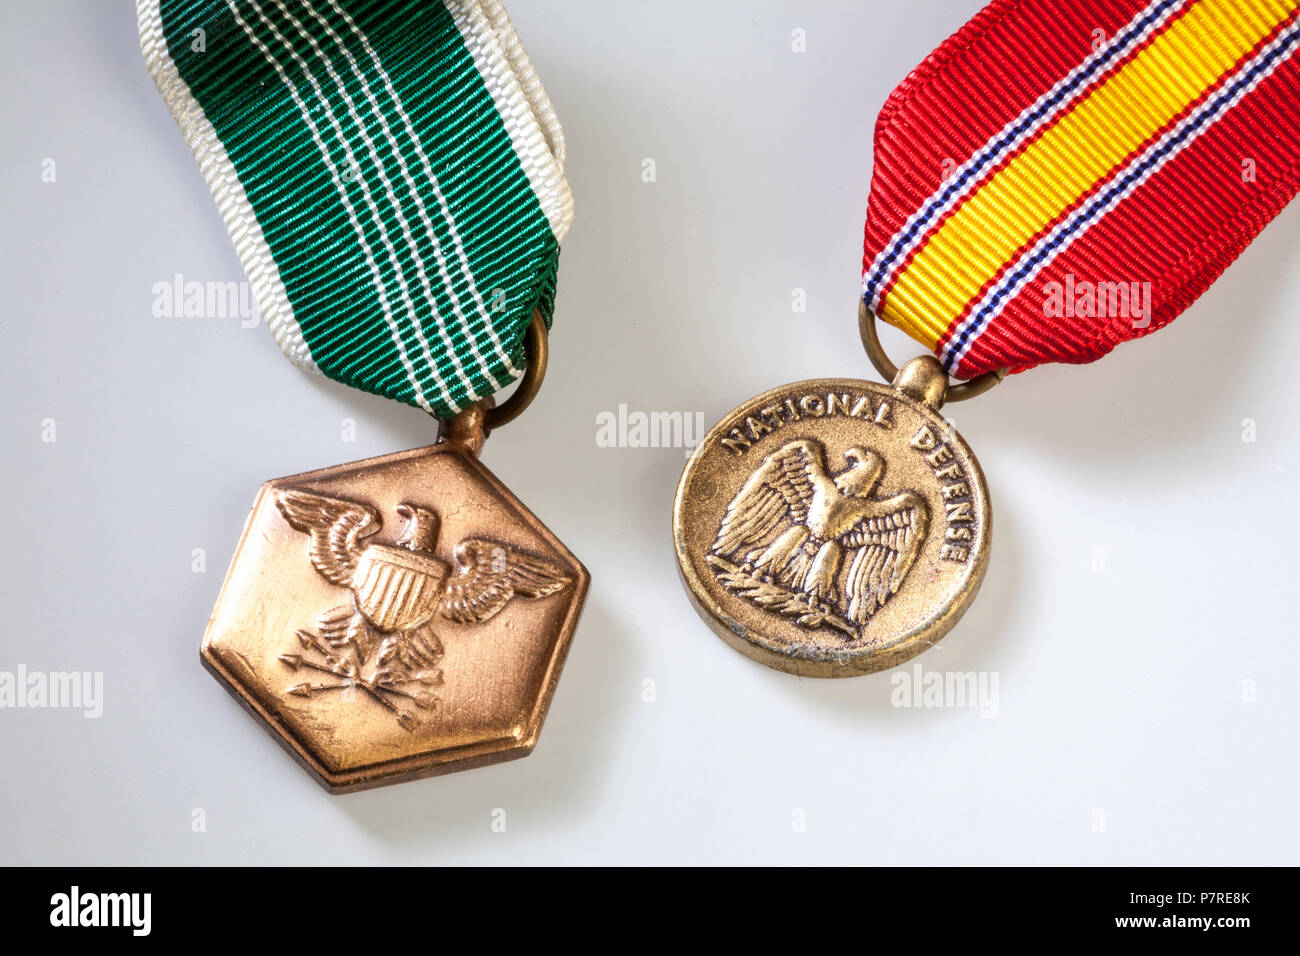 U.S. Army Military Medals, USA Stock Photo